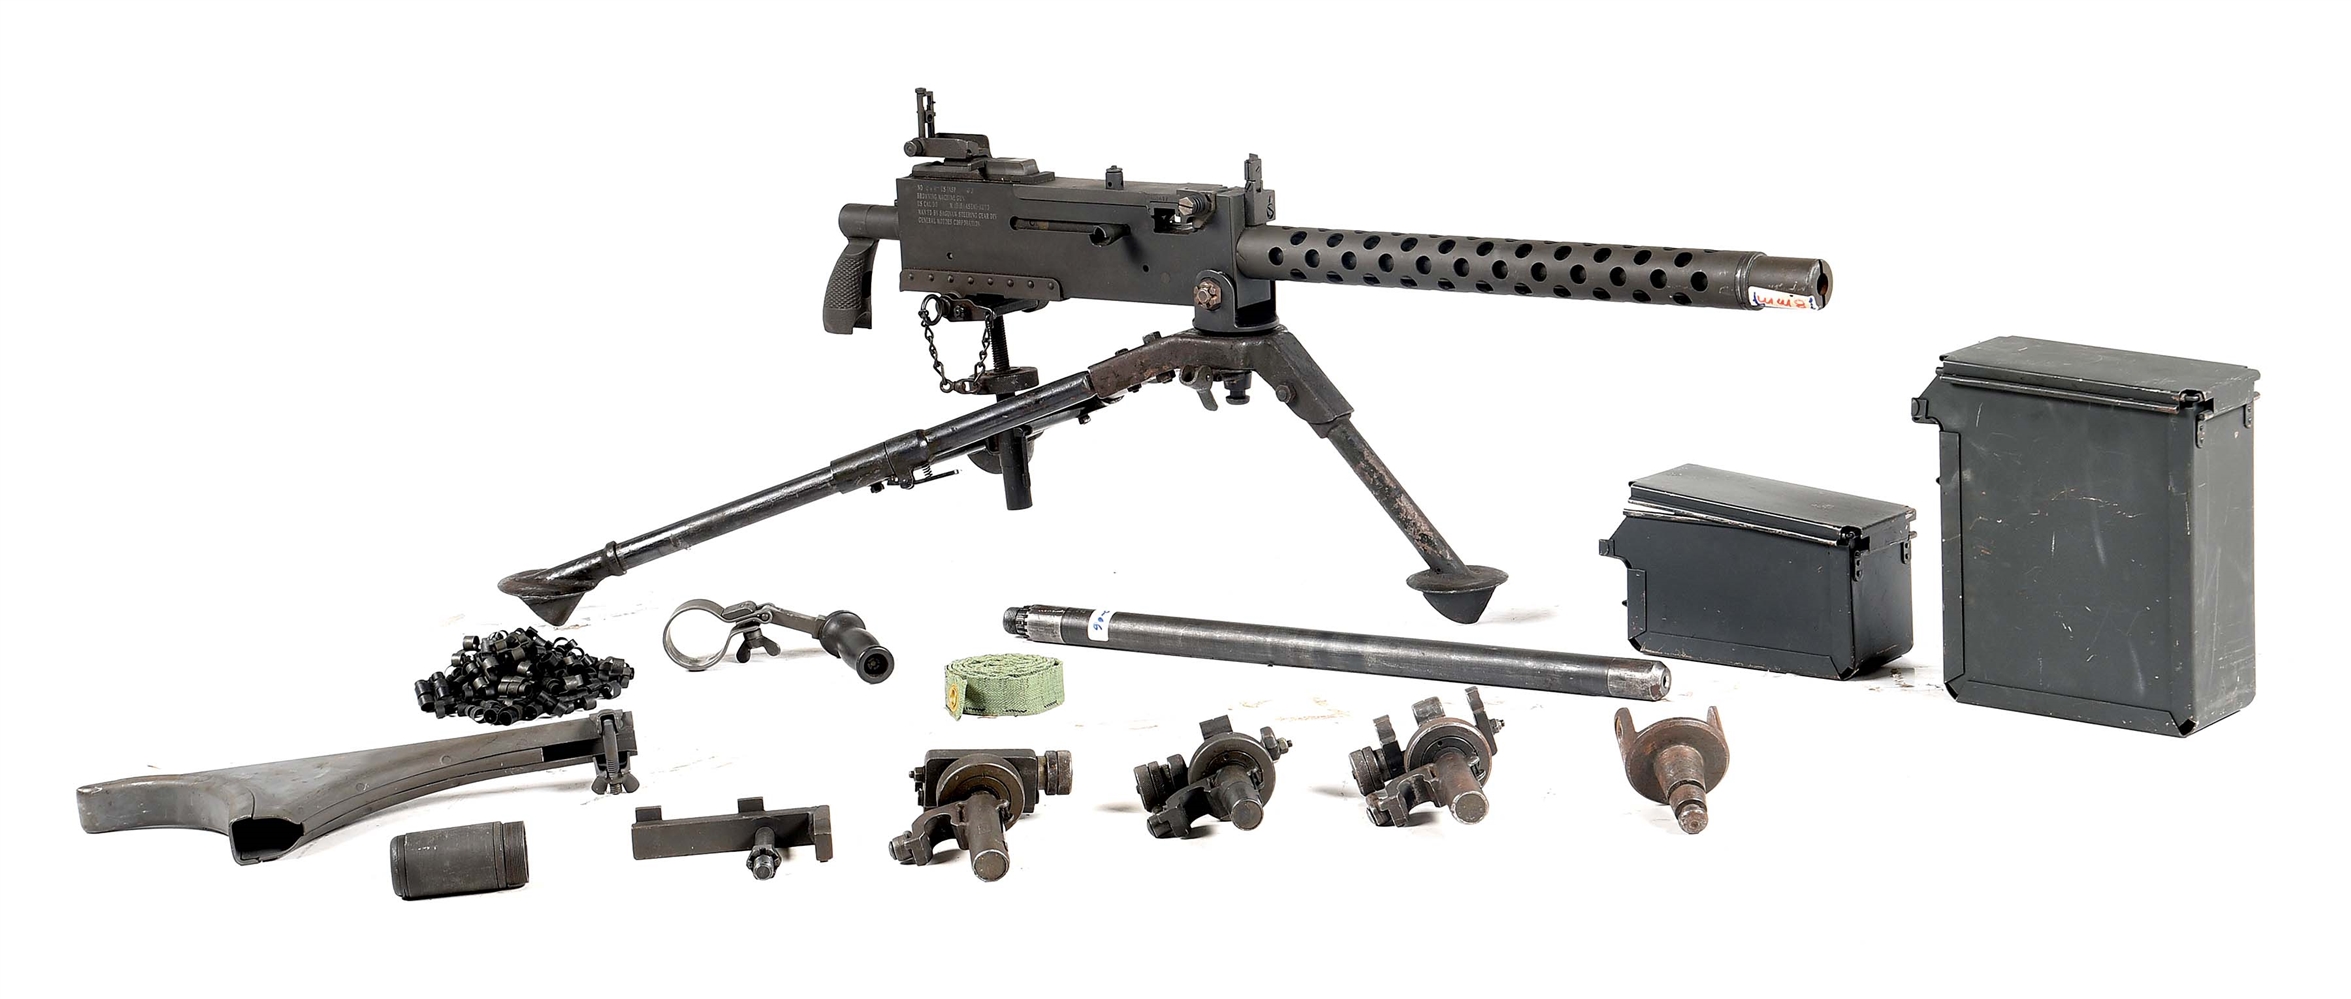 (M) ALWAYS DESIRABLE MCGI ISRAELI 1919A4 SEMI-AUTOMATIC RIFLE WITH NICE ASSORTMENT OF ACCESSORIES.